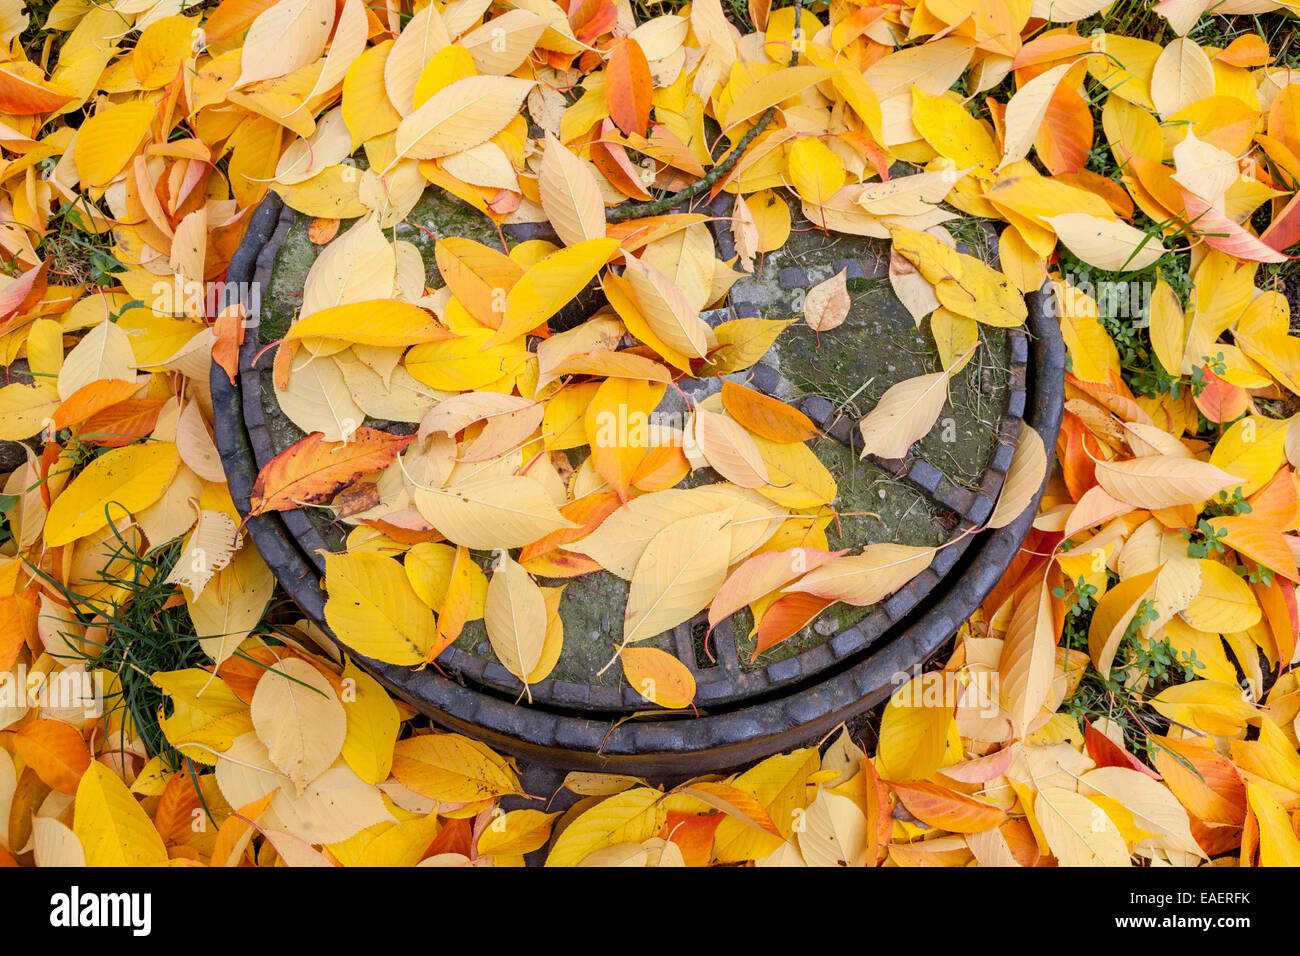 Fallen autumn Leaves on the ground lying on a manhole cover Stock Photo